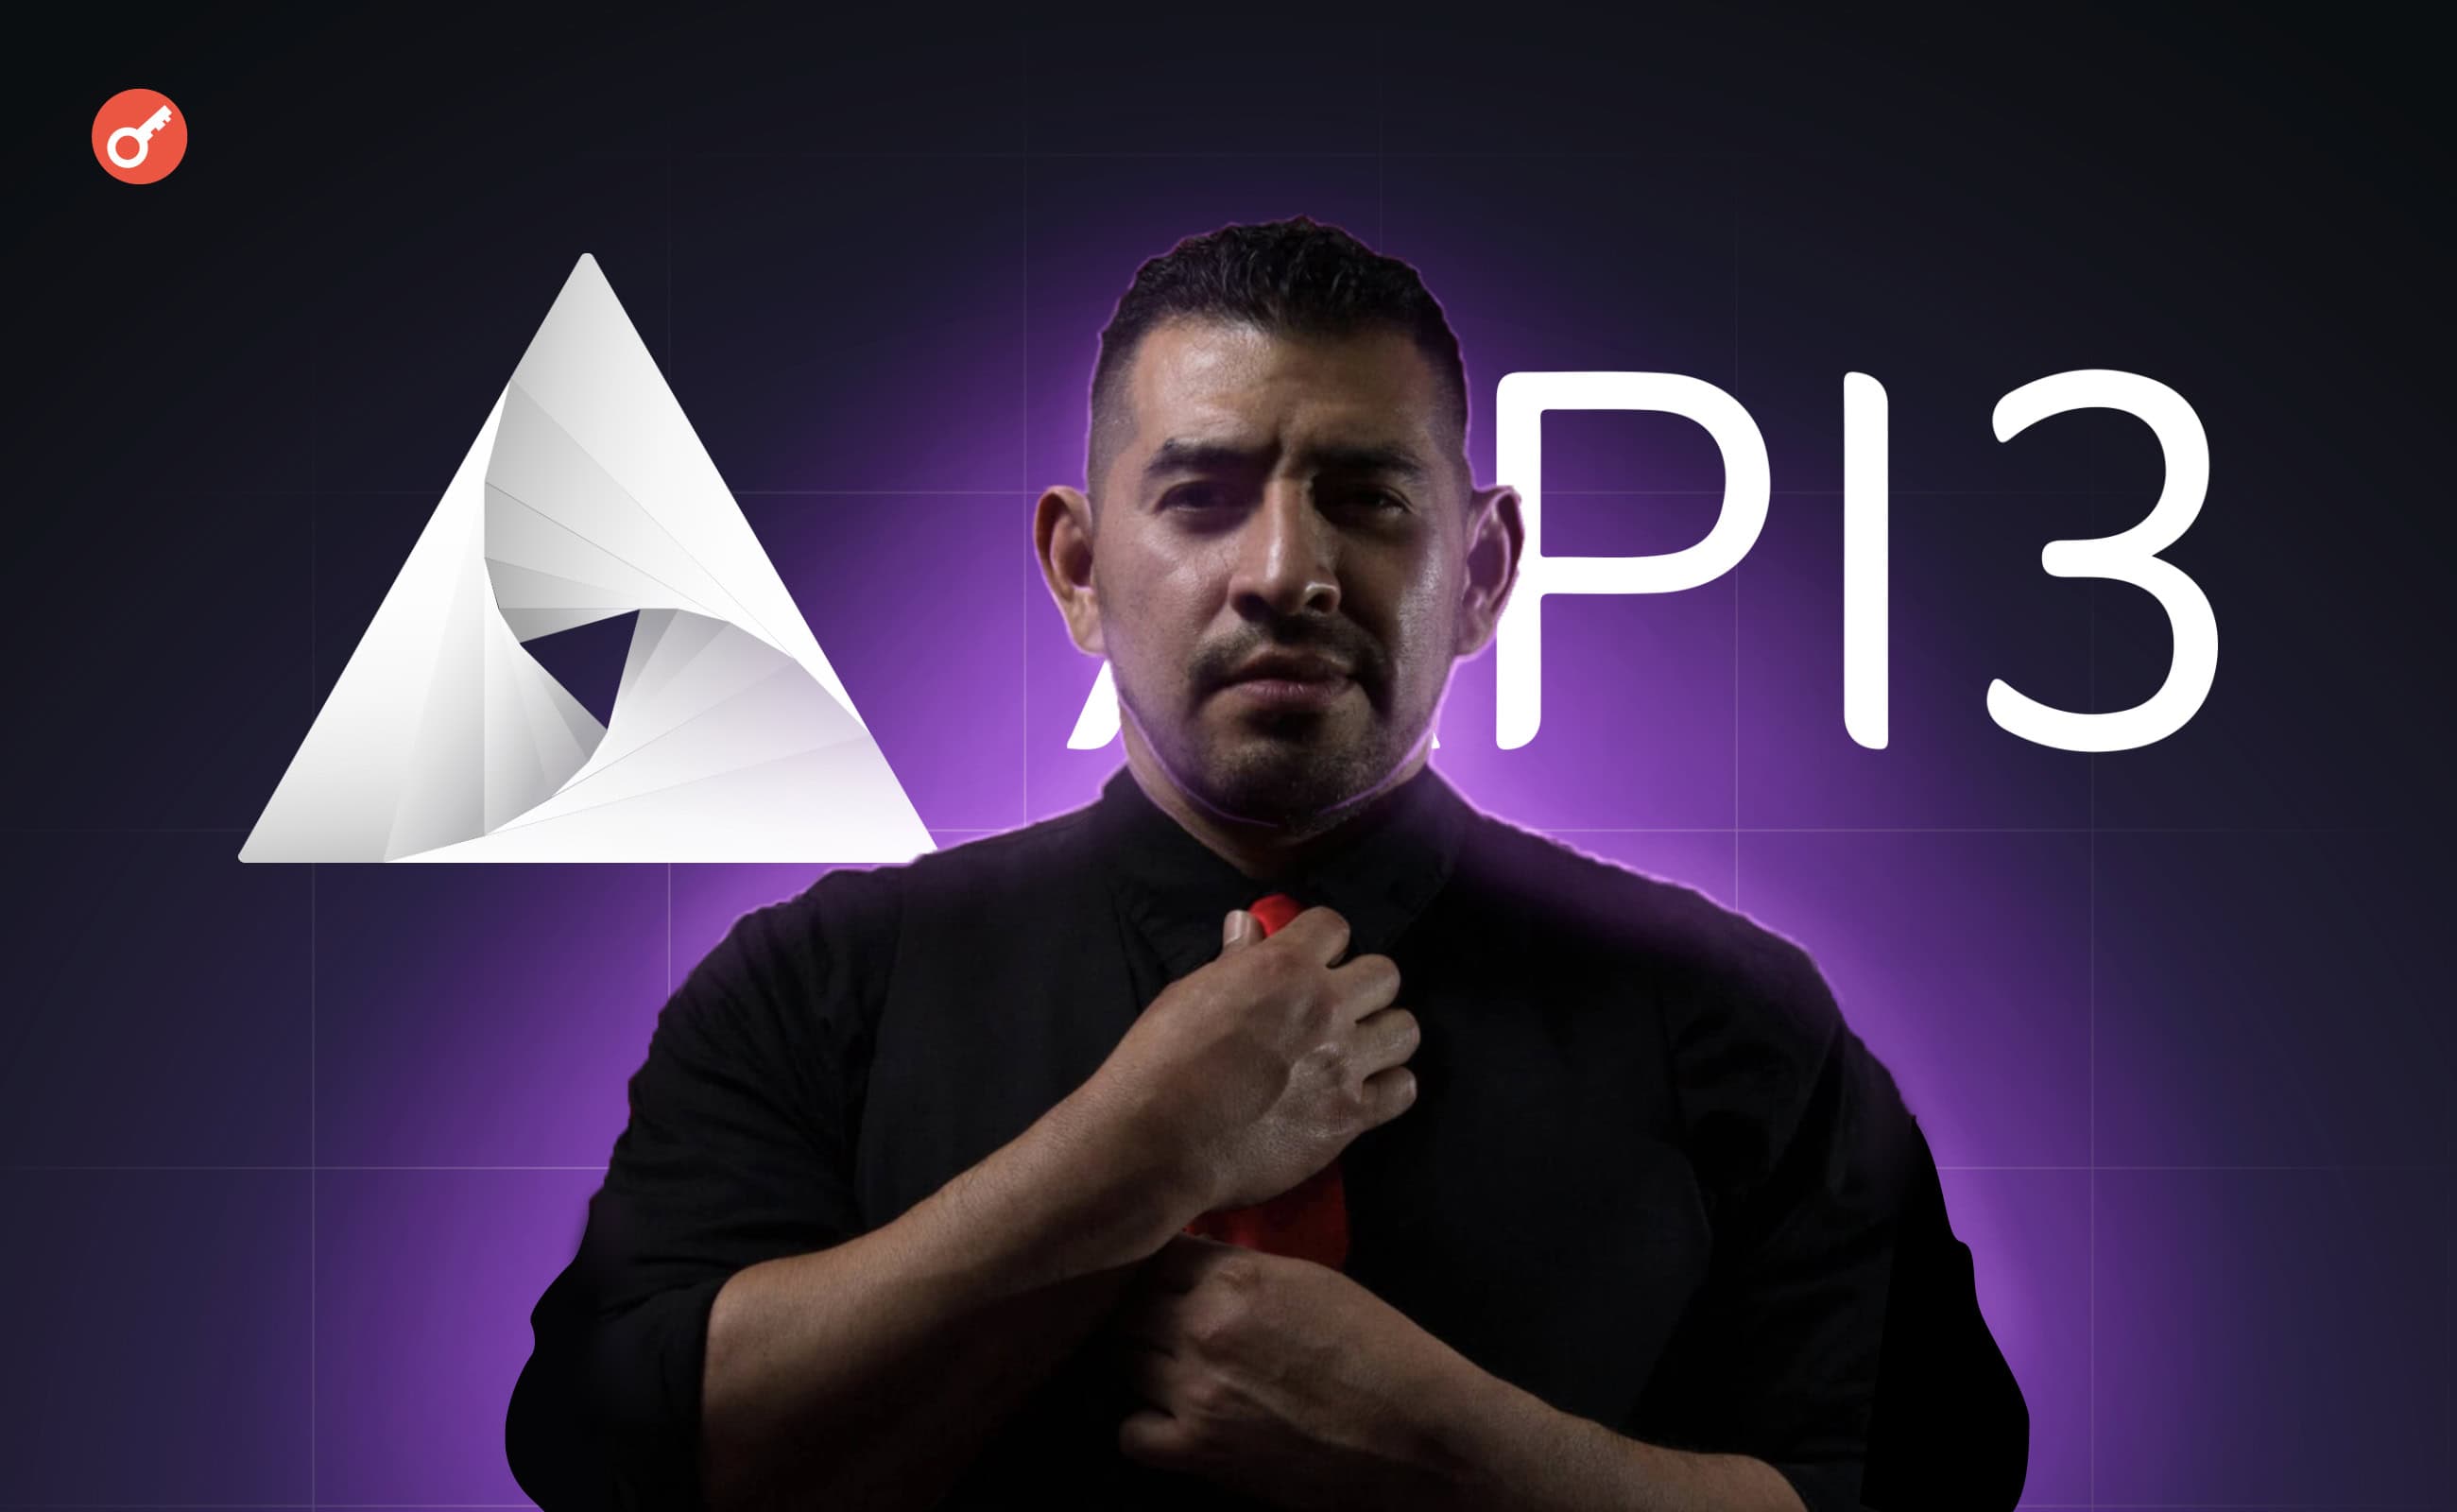 Interview with Billy Jitsu: on the API3 Oracle Protocol and the Benefits of OEVs. Заглавный коллаж статьи.